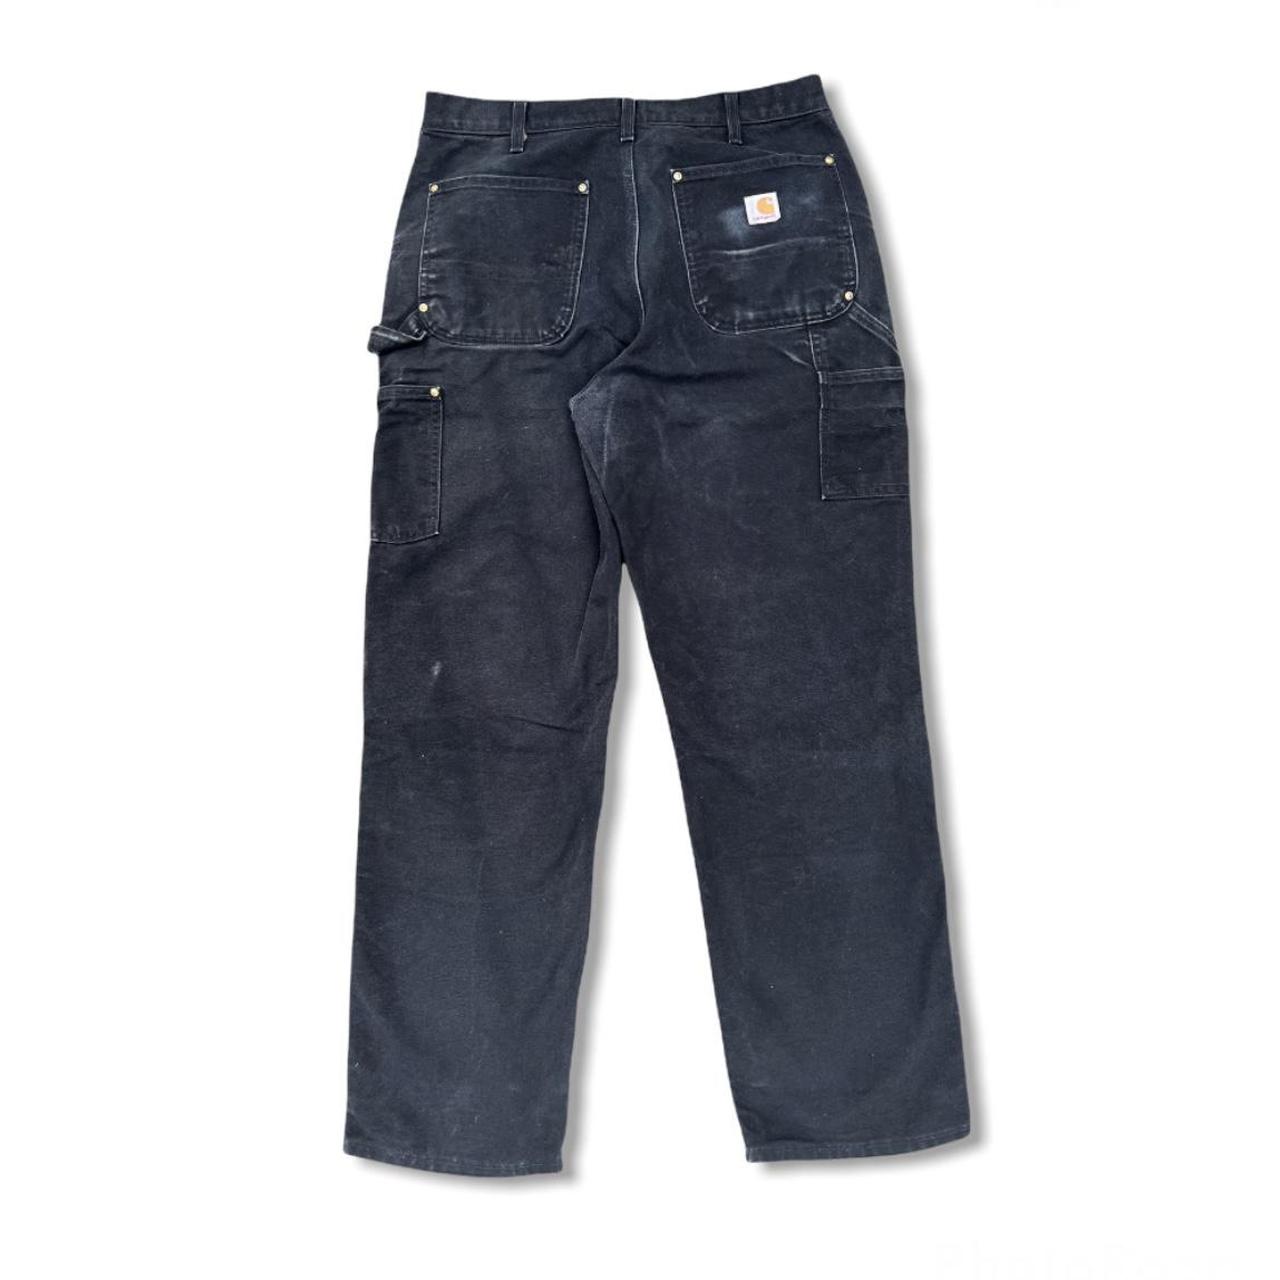 Product Image 2 - Vintage Carhartt Work Pants Double